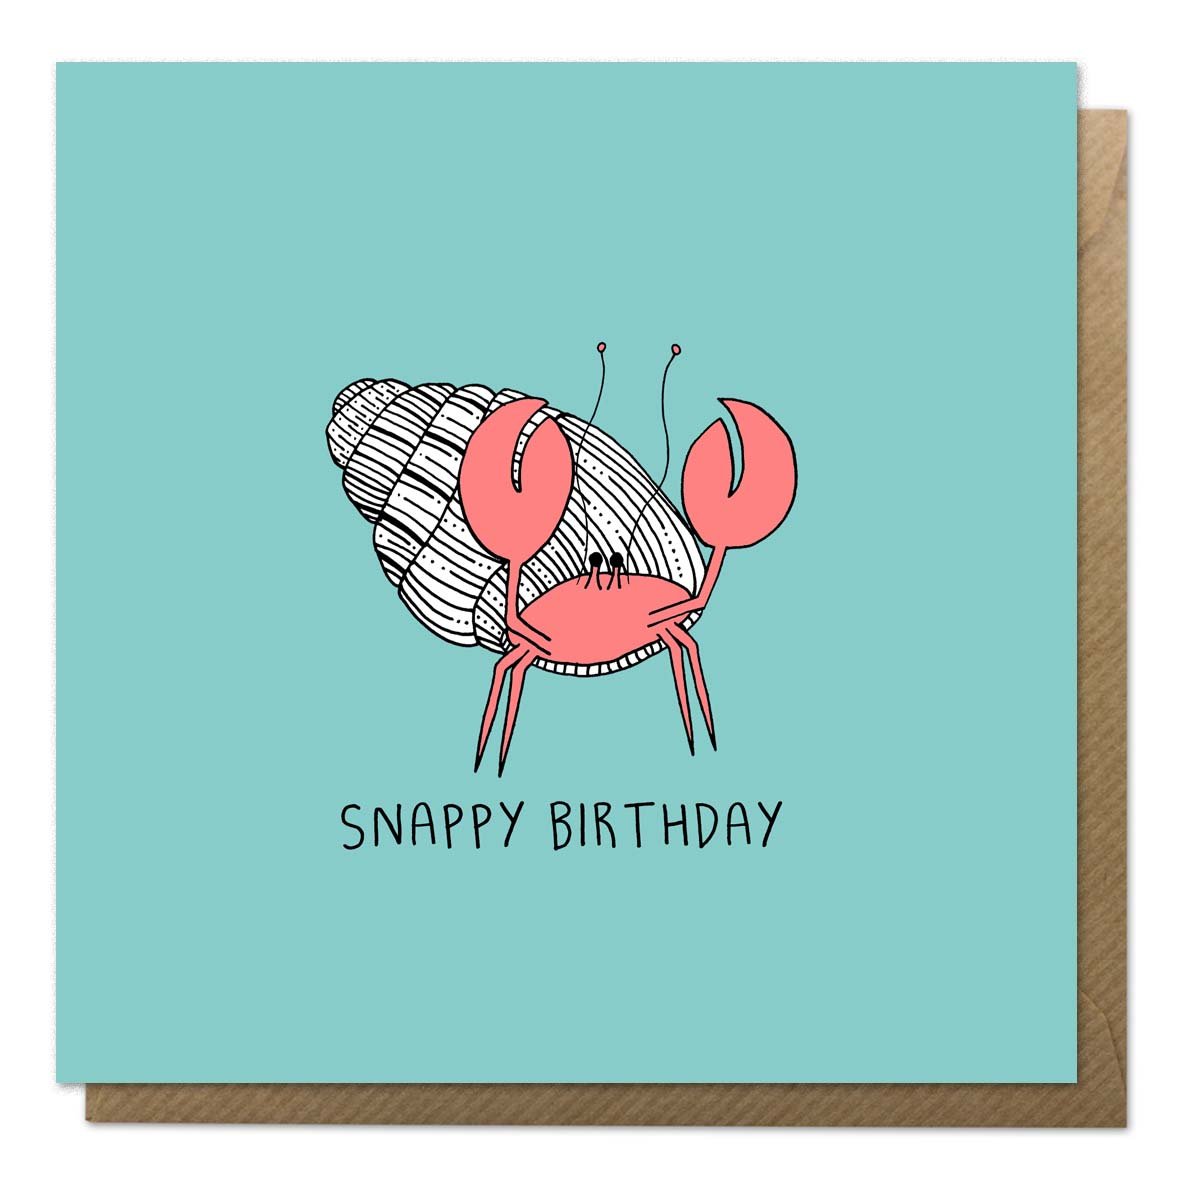 Blue birthday card with an illustration of a hermit crab